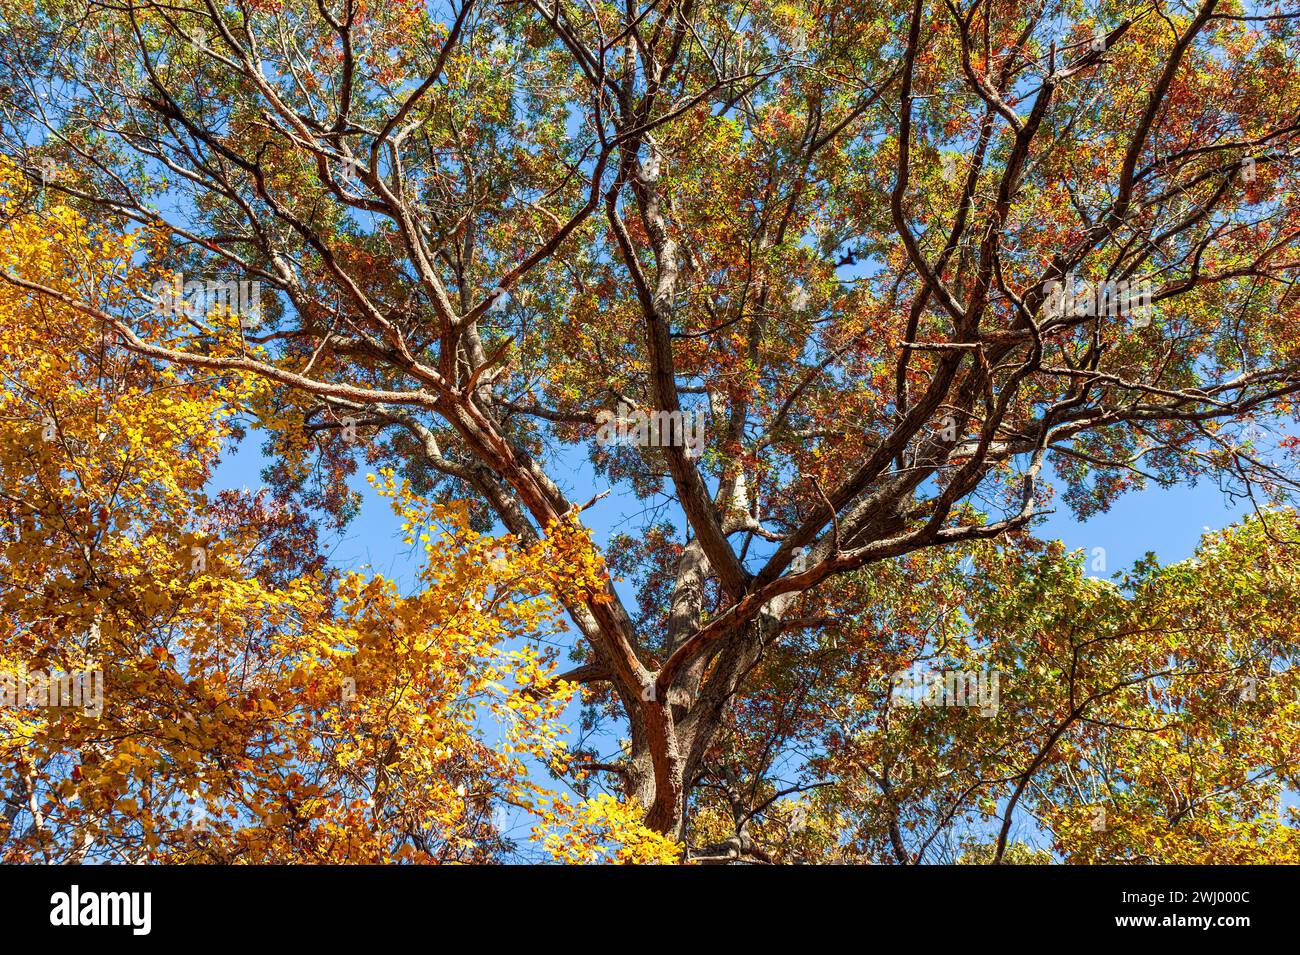 The canopy of an oak tree raising above smaller trees. Leaves changing color, in vibrant shades of yellow, orange, or red. Hopkinton State Park, MA. Stock Photo